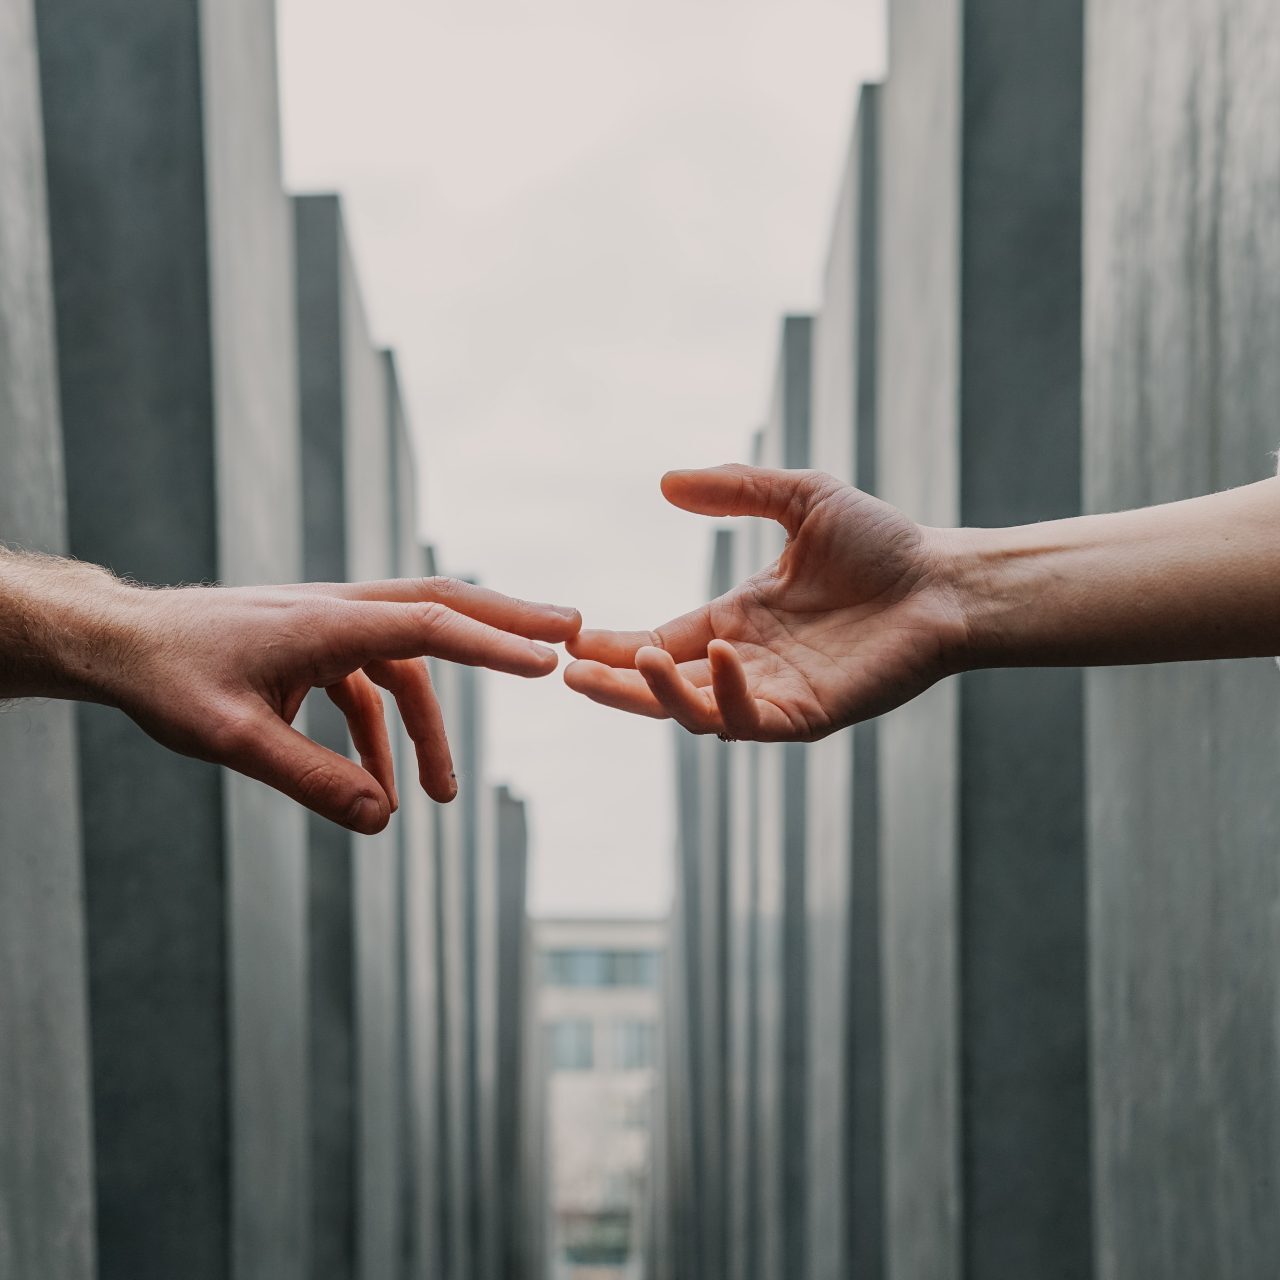 Two hands reaching out to each other in a line of concrete buildings.